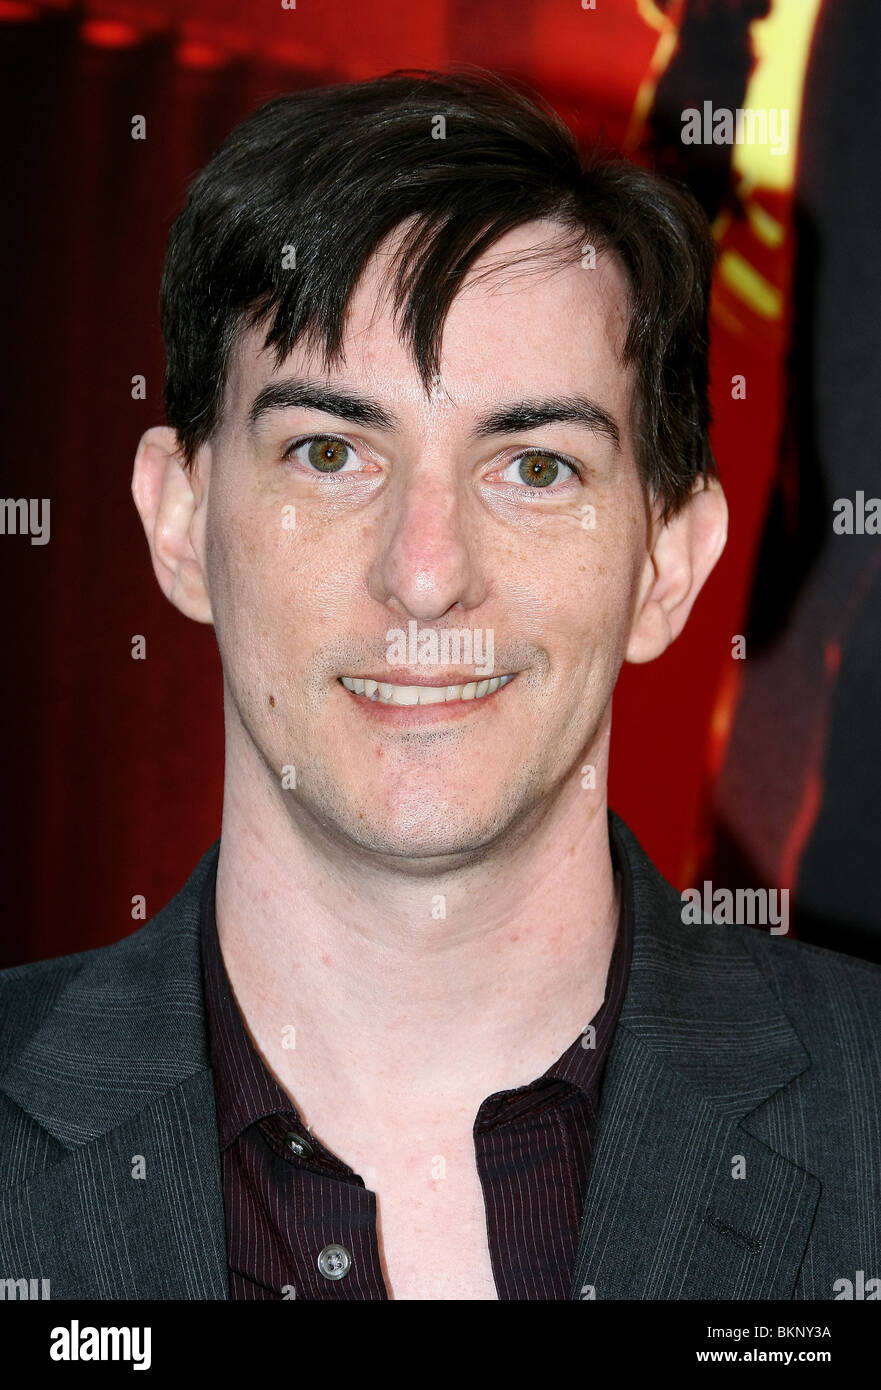 WESLEY STRICK WORLD PREMIERE A NIGHTMARE ON ELM STREET HOLLYWOOD LOS ANGELES CA 27 April 2010 Stock Photo